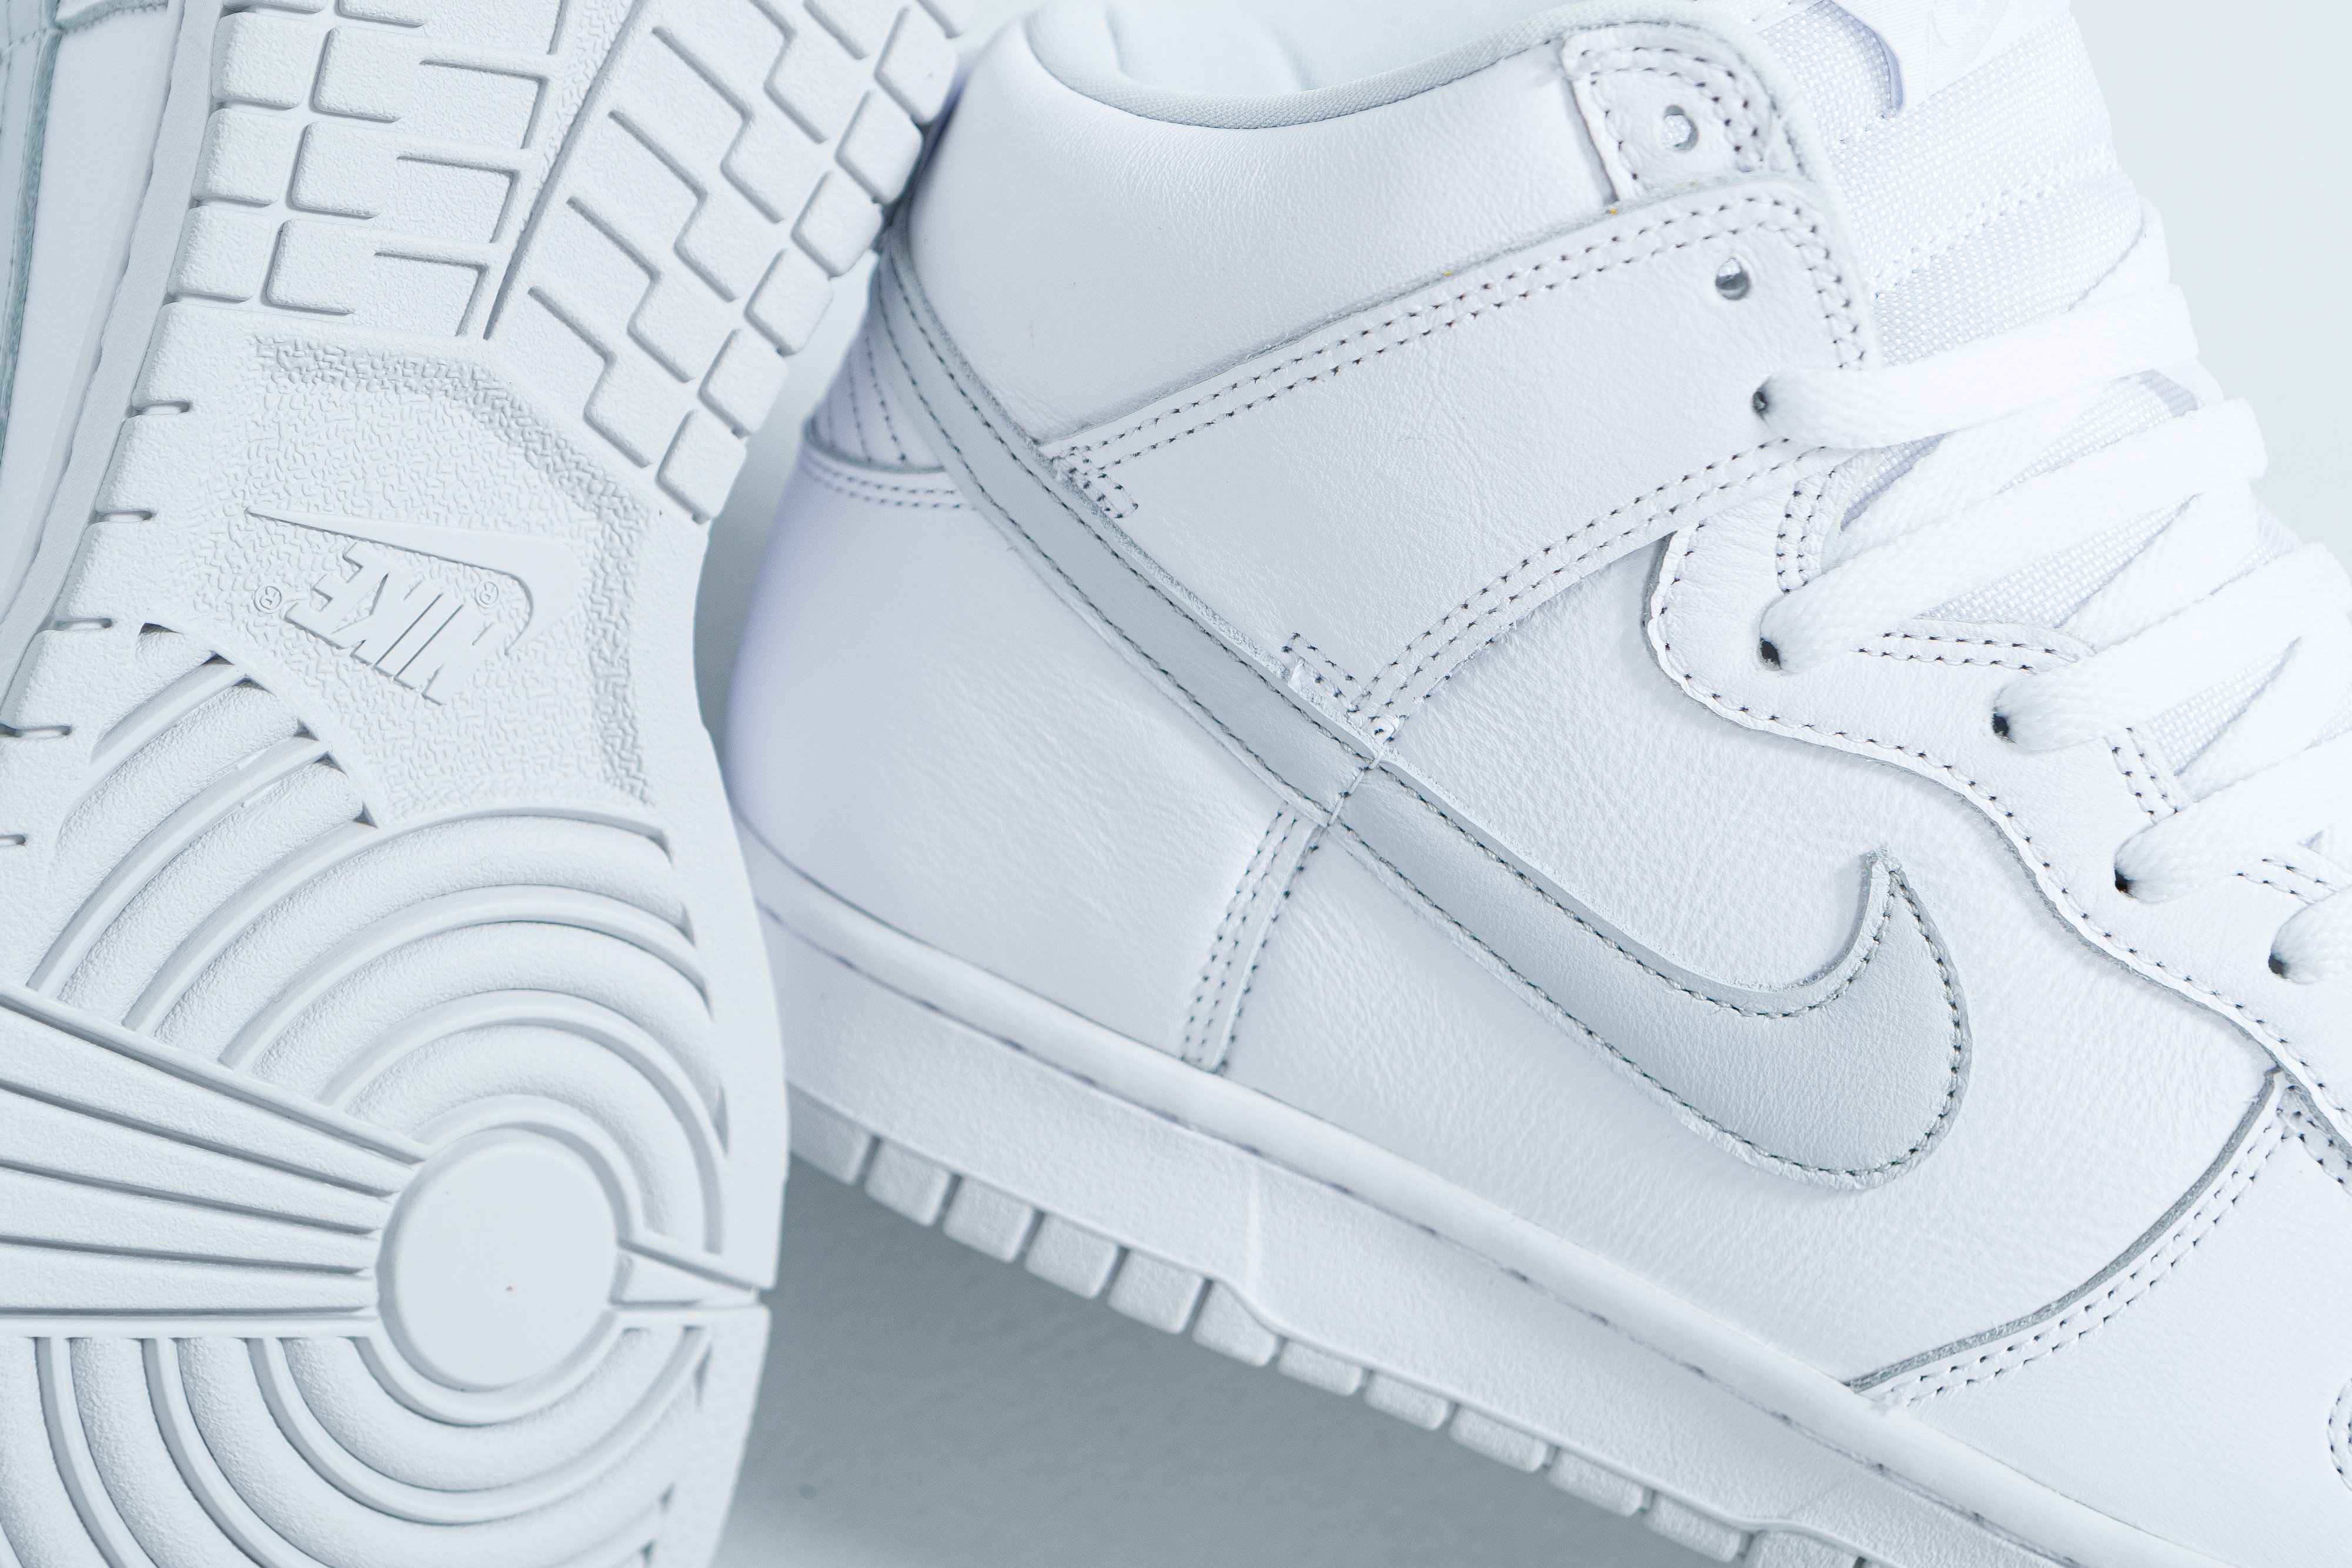 Nike - Dunk Hi SP - White/Pure Platinum - Up There